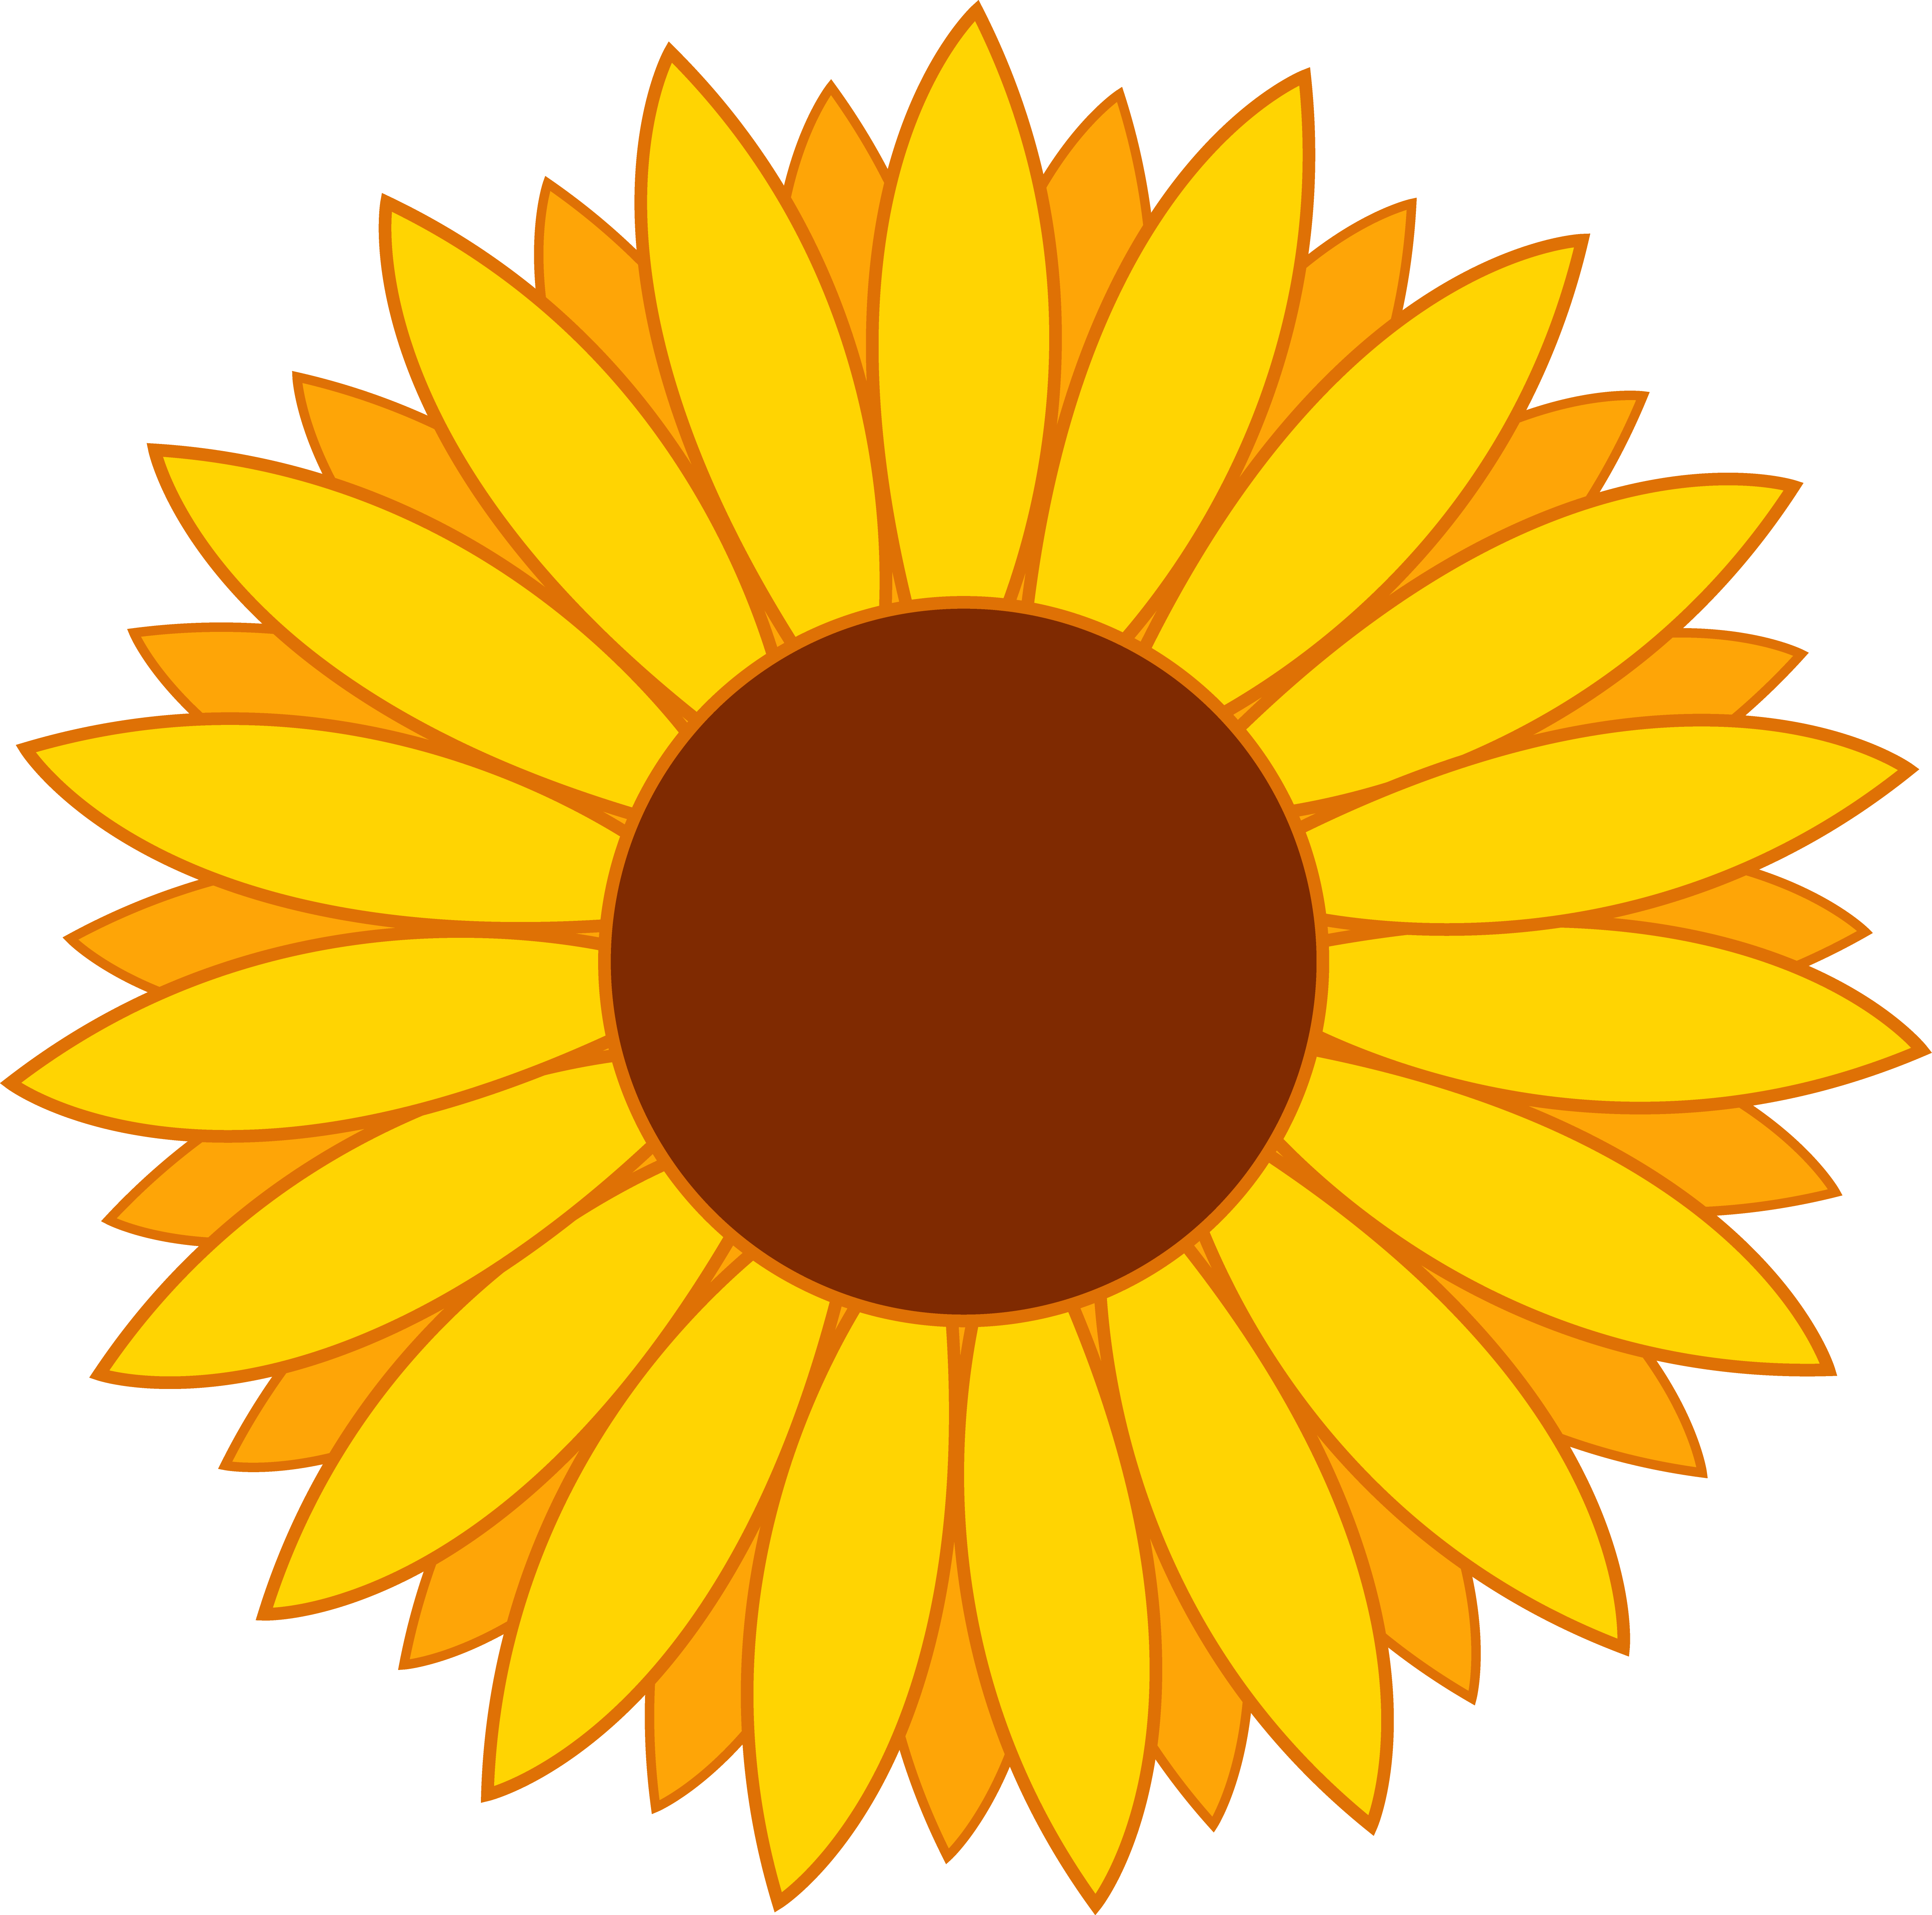 Free Sunflower Clipart Transparent, Download Free Sunflower Clipart Transparent png image, Free ClipArts on Clipart Library